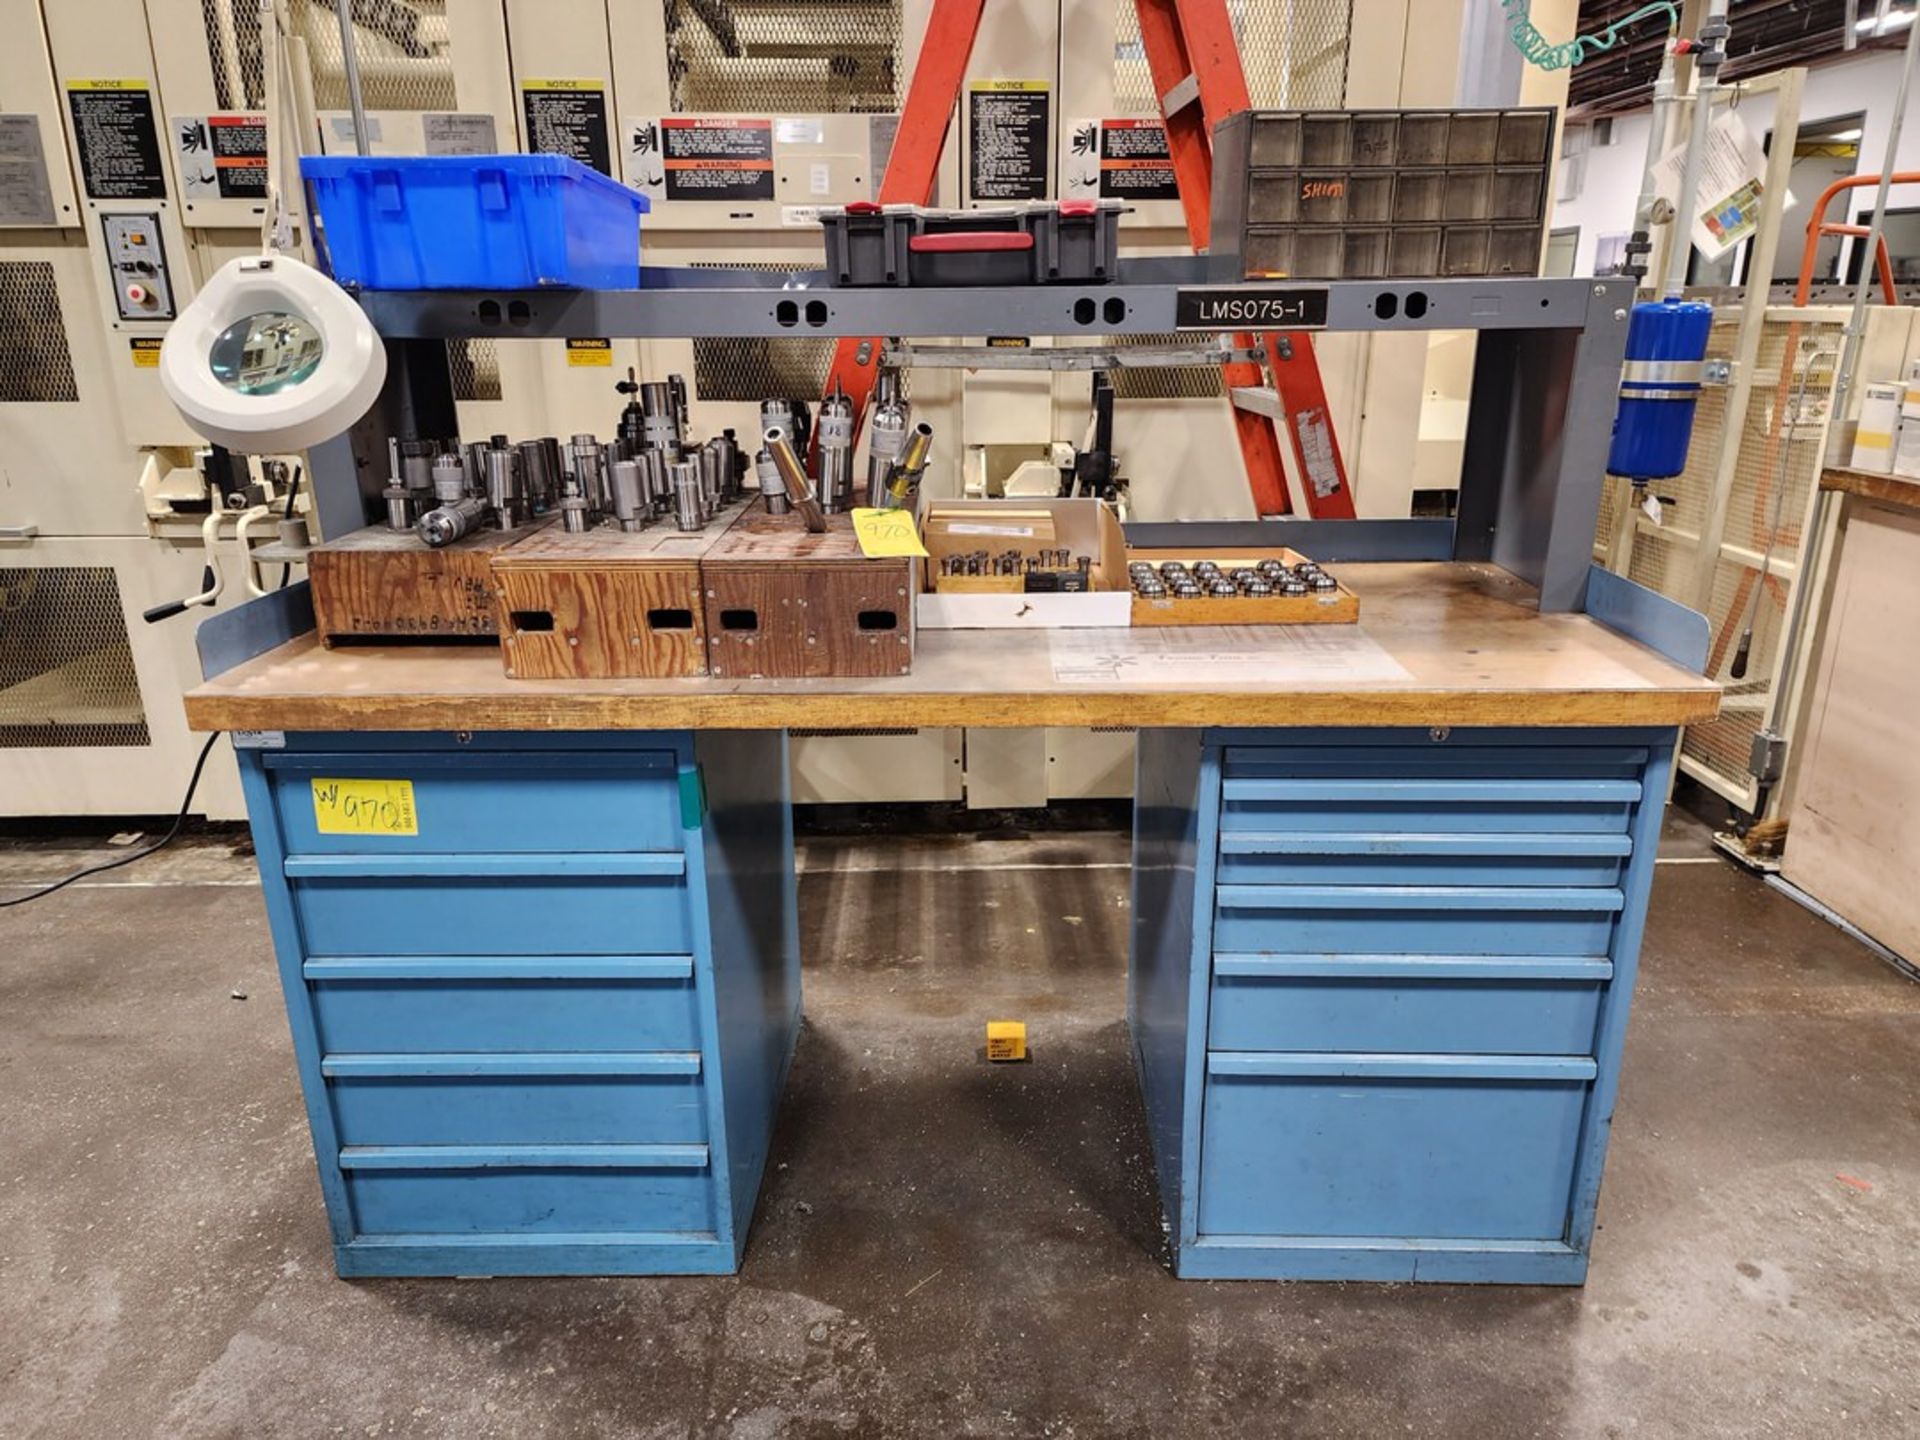 2-Bin Modular Material Cabinet W/ Jig Boring Machine Contents & Other Assorted Contents